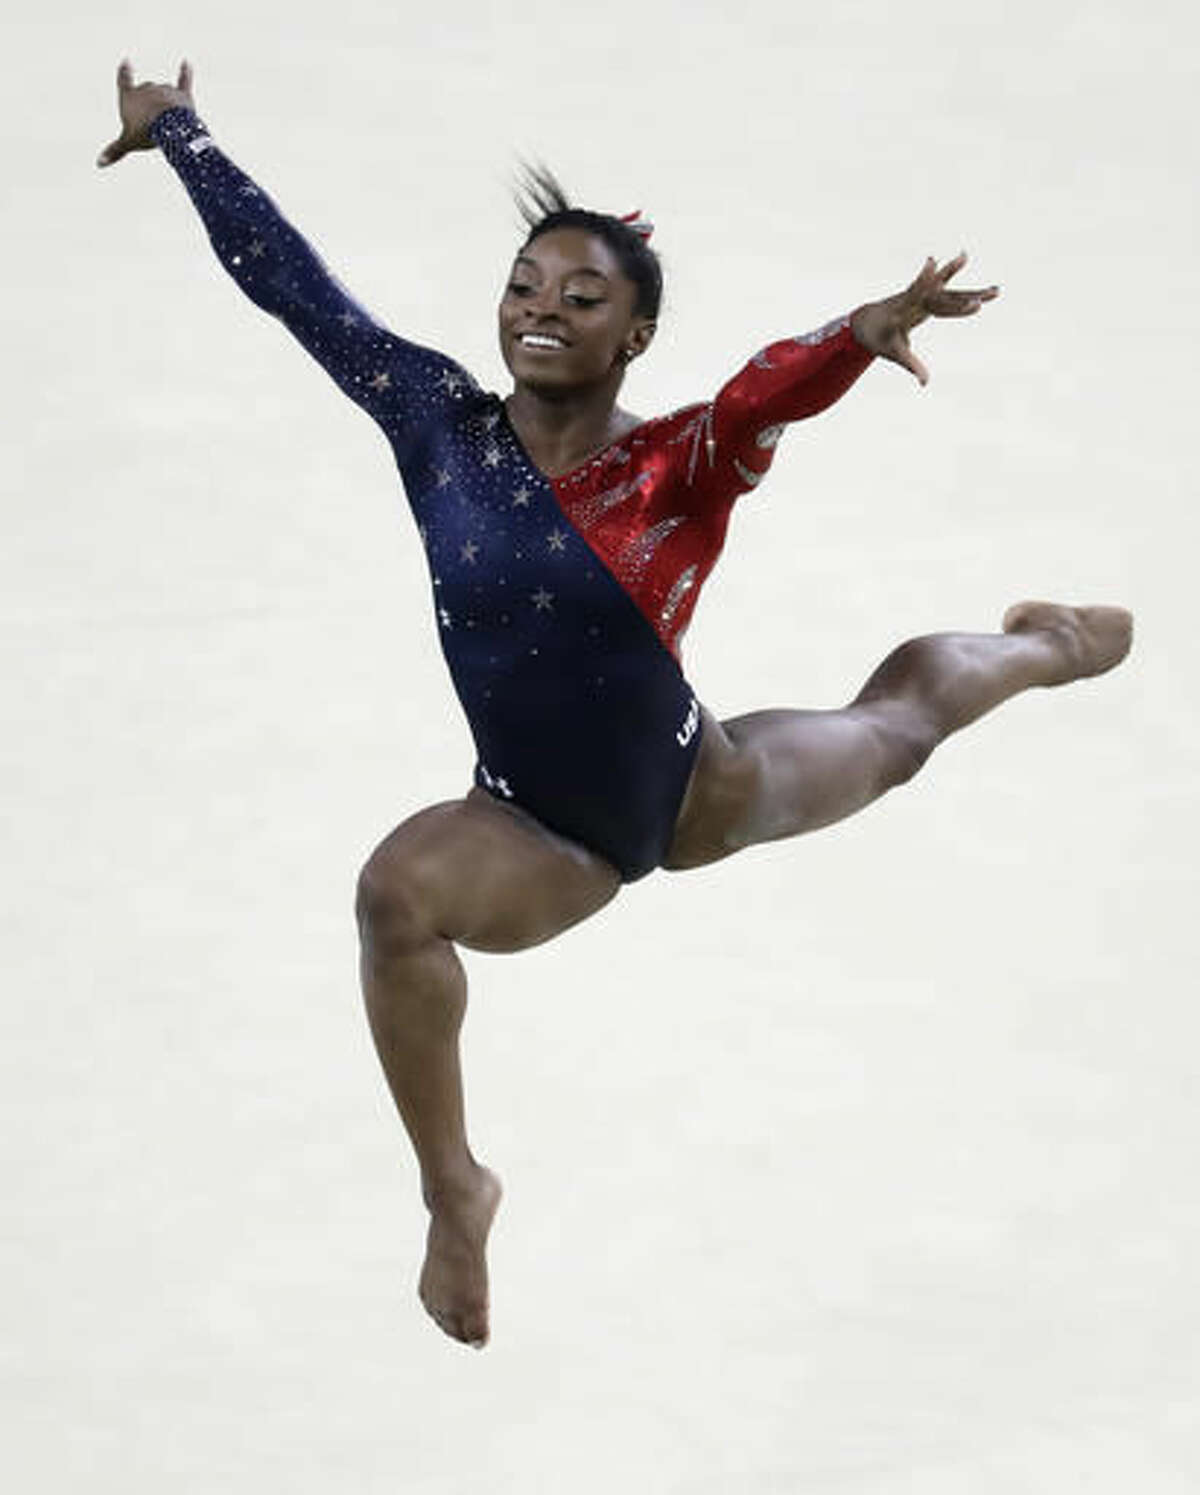 United States' Simone Biles performs on the floor during the artistic gymnastics women's qualification at the 2016 Summer Olympics in Rio de Janeiro, Brazil, Sunday, Aug. 7, 2016. (AP Photo/Dmitri Lovetsky)